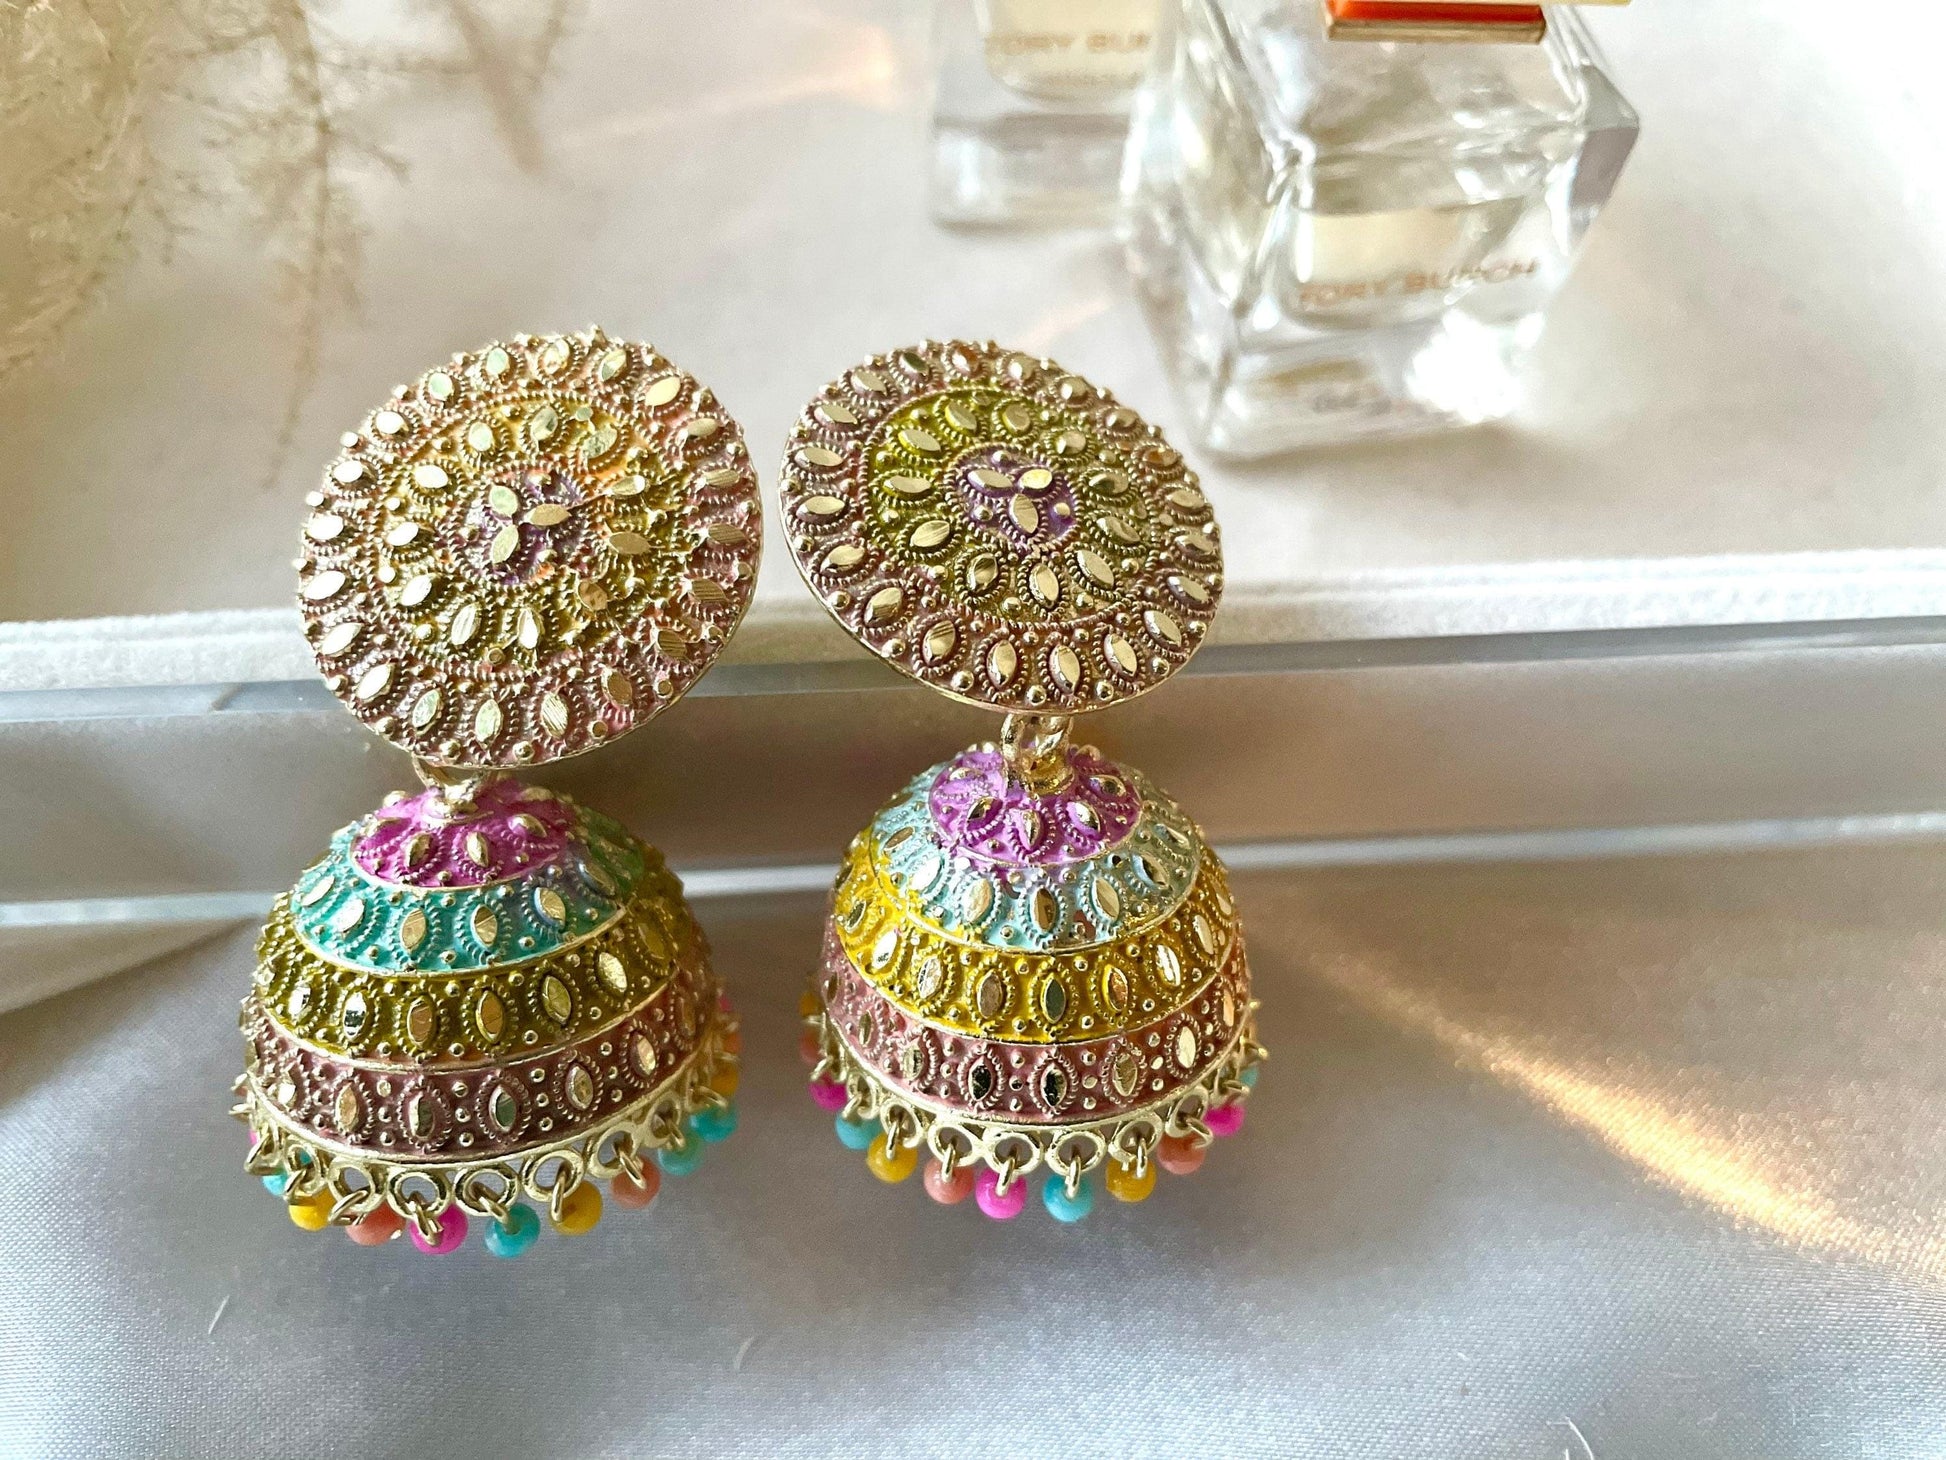 2 multi coloured jhumkas in one frame 